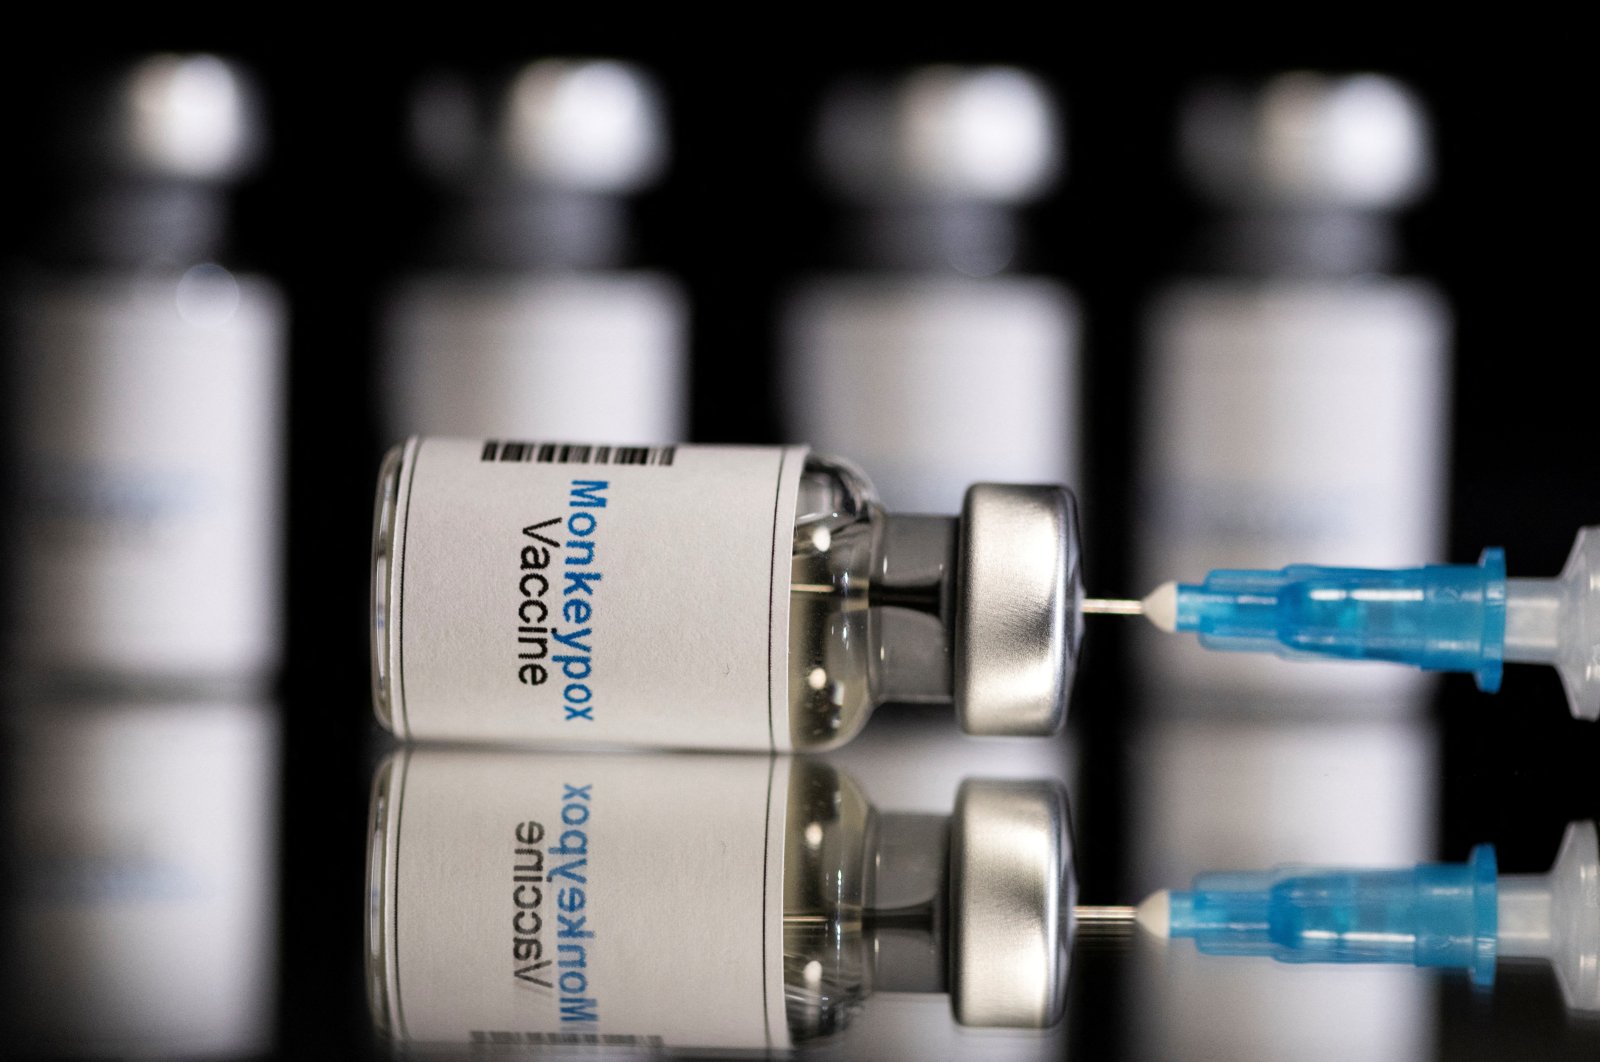 Mock-up vials labeled &quot;monkeypox vaccine&quot; and a medical syringe are seen in this illustration taken on May 25, 2022. (Reuters Photo)